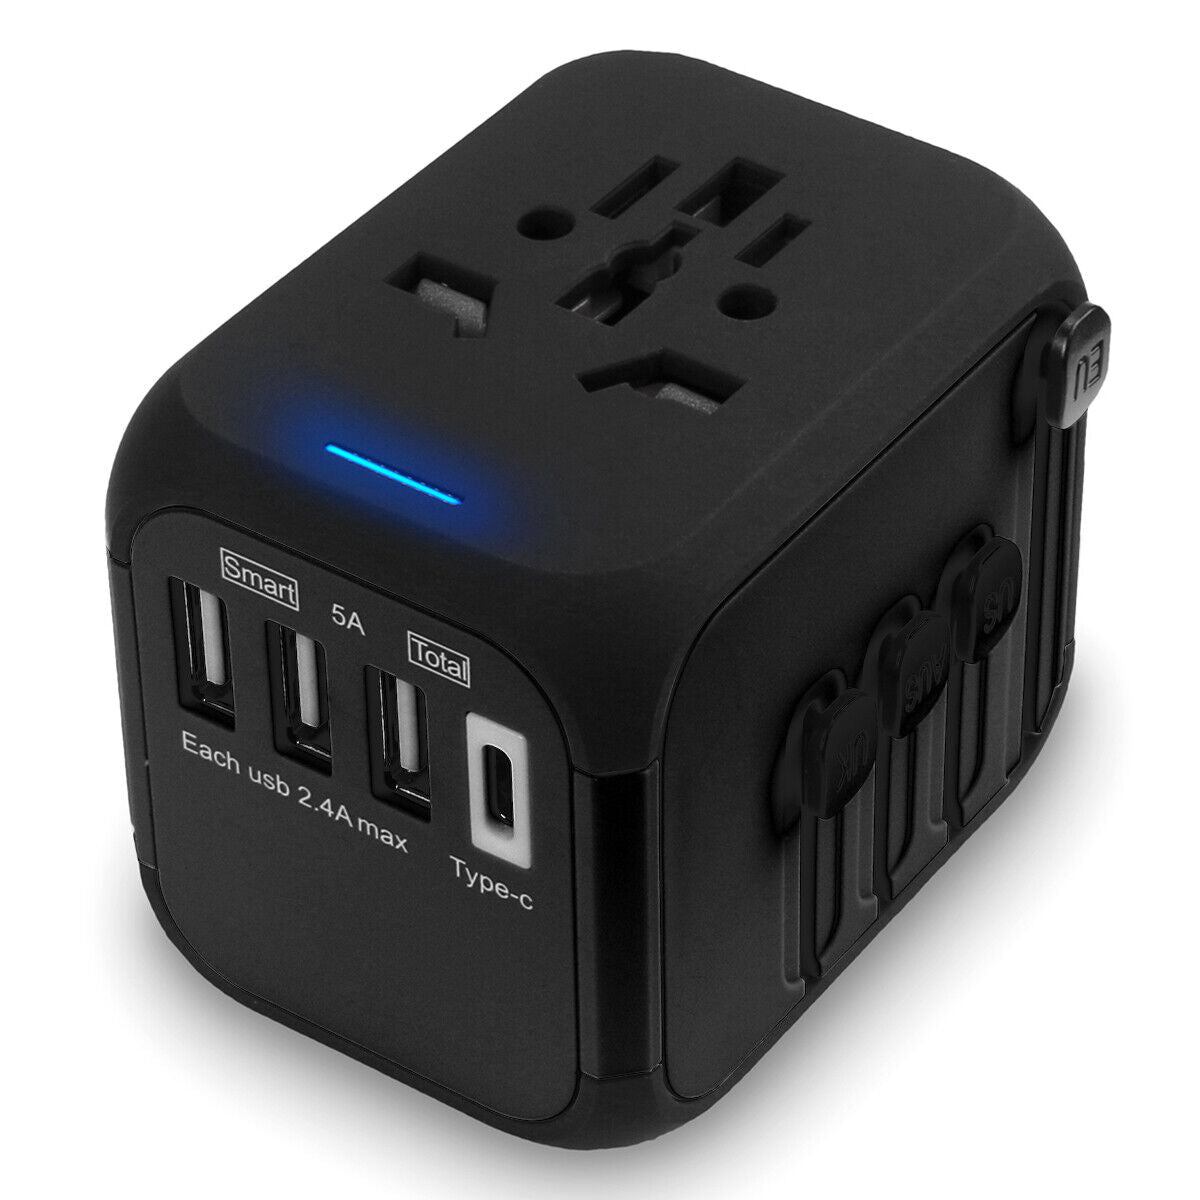 Air Canada Universal Travel Adapter with 4 USB Ports, 4 USB ports 